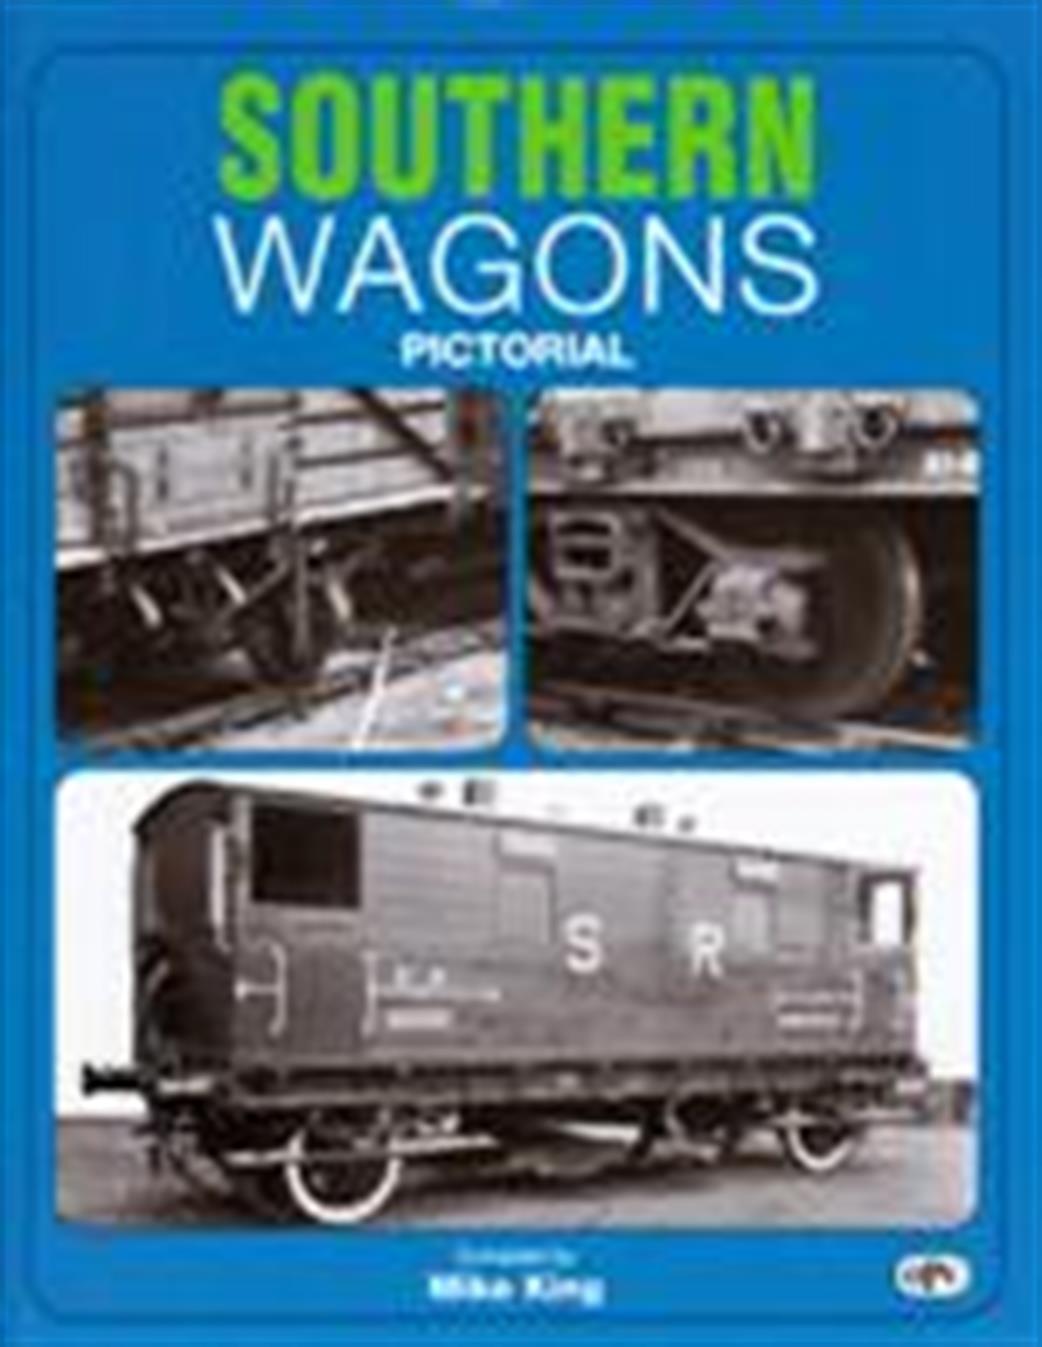 Ian Allan Publishing 9780860935971 Southern Wagon Pictorial By Mike King